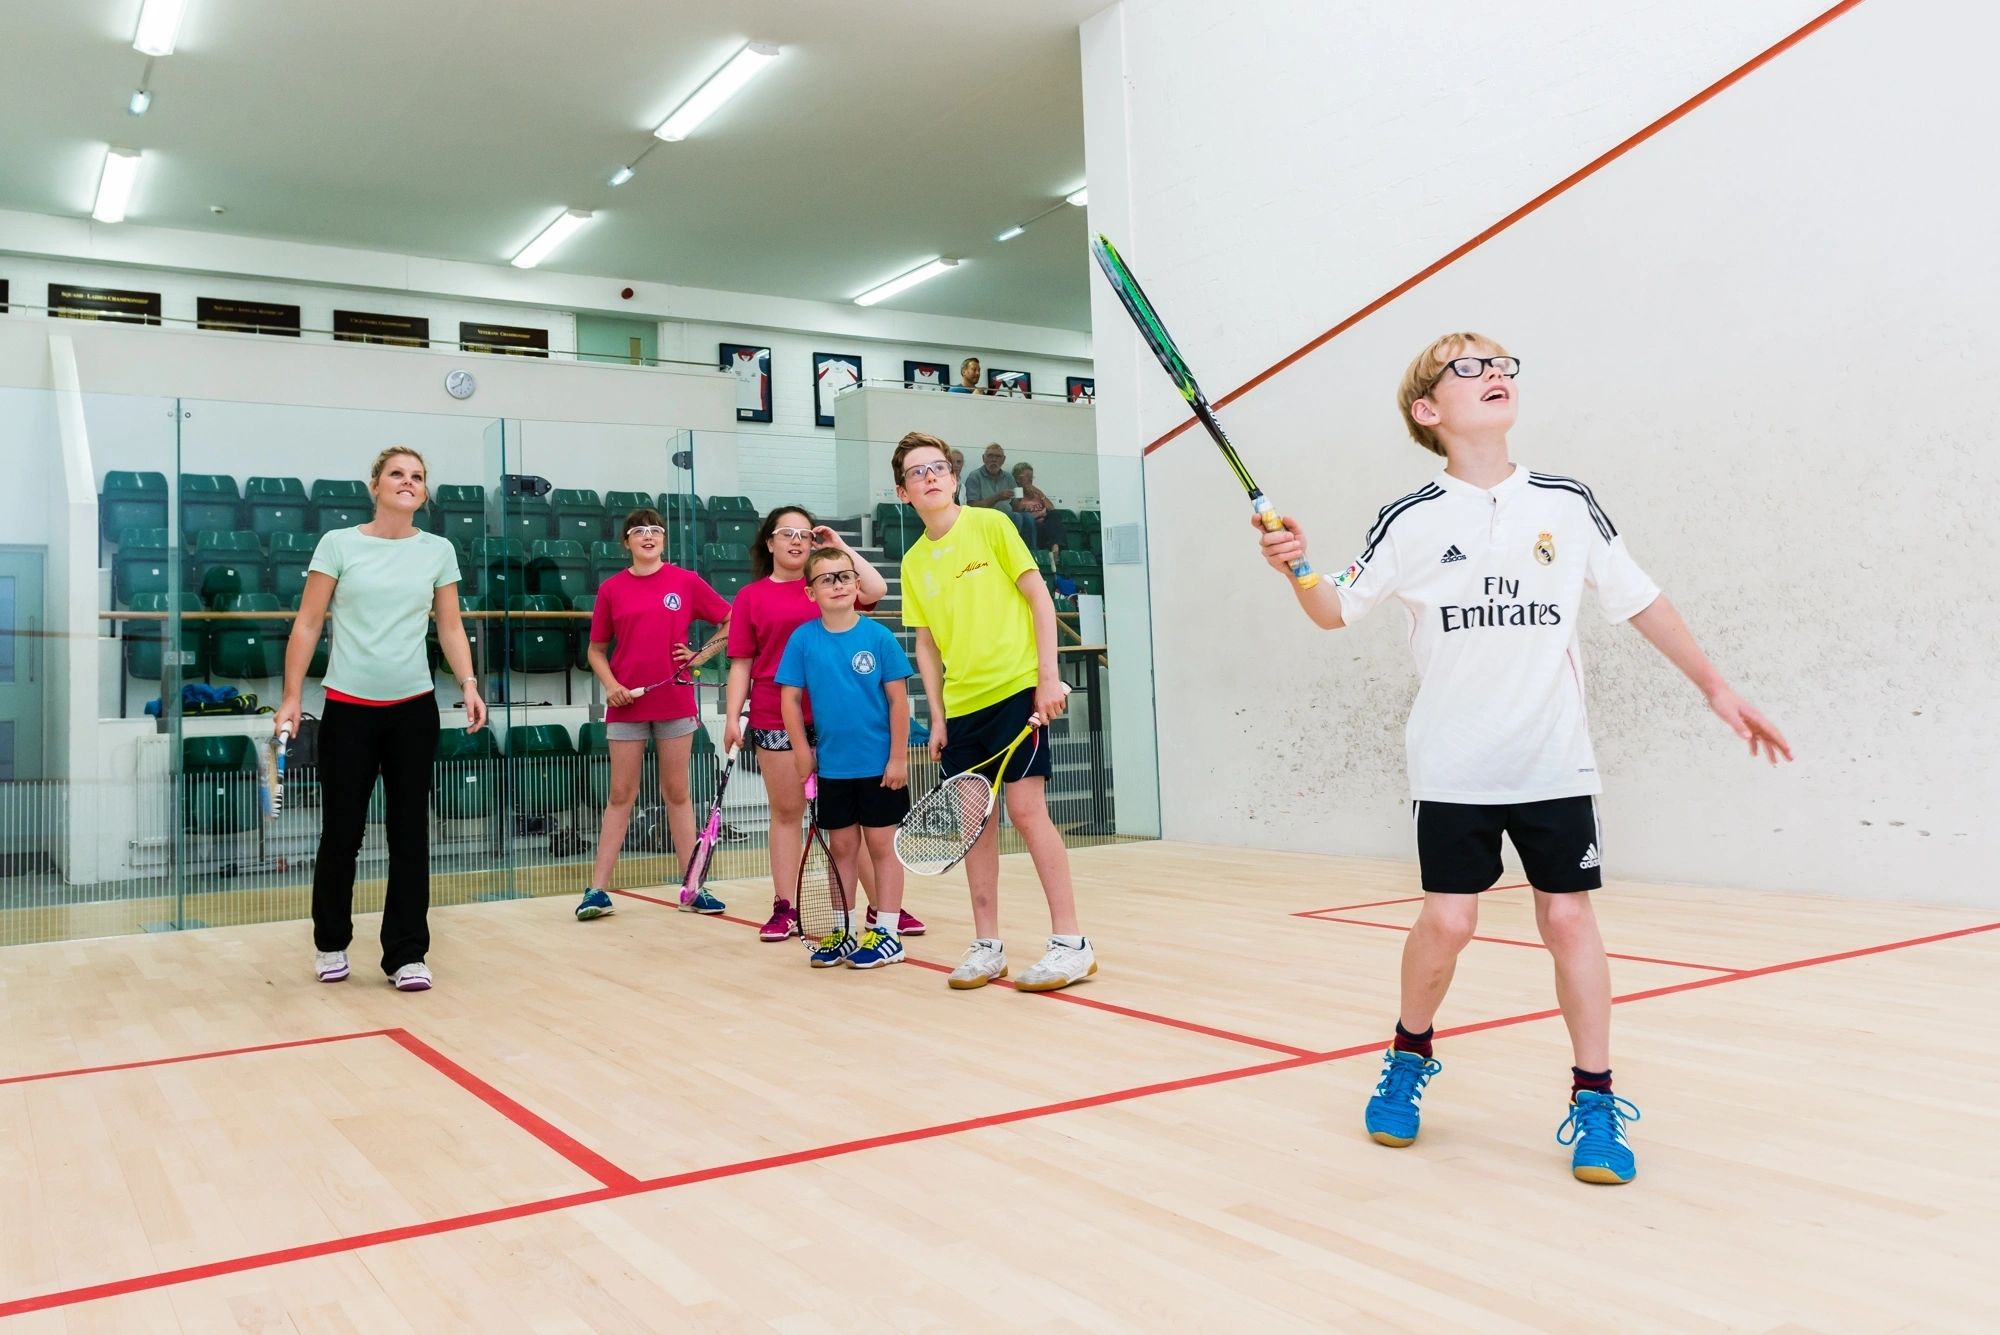 Junior Squash Sessions tonight.
Contact us for information and to book your childs place.
Hope to be using lots of positive language tonight!
👍😄😄